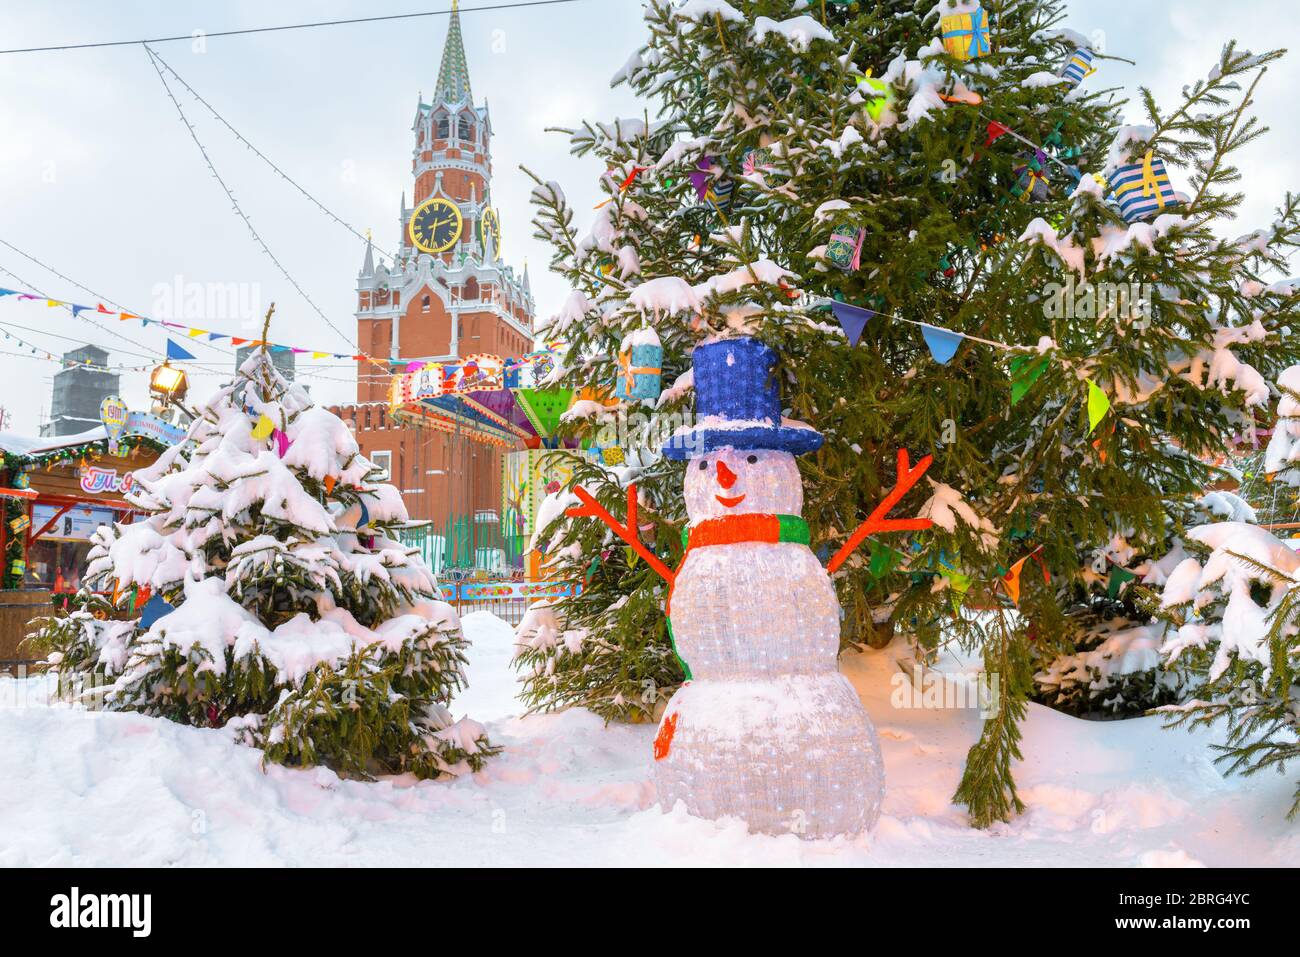 Moscow, Russia - Feb 5, 2018: Christmas decorations near Moscow Kremlin in winter. Snowman by the Christmas tree on the festive Red Square. Central Mo Stock Photo